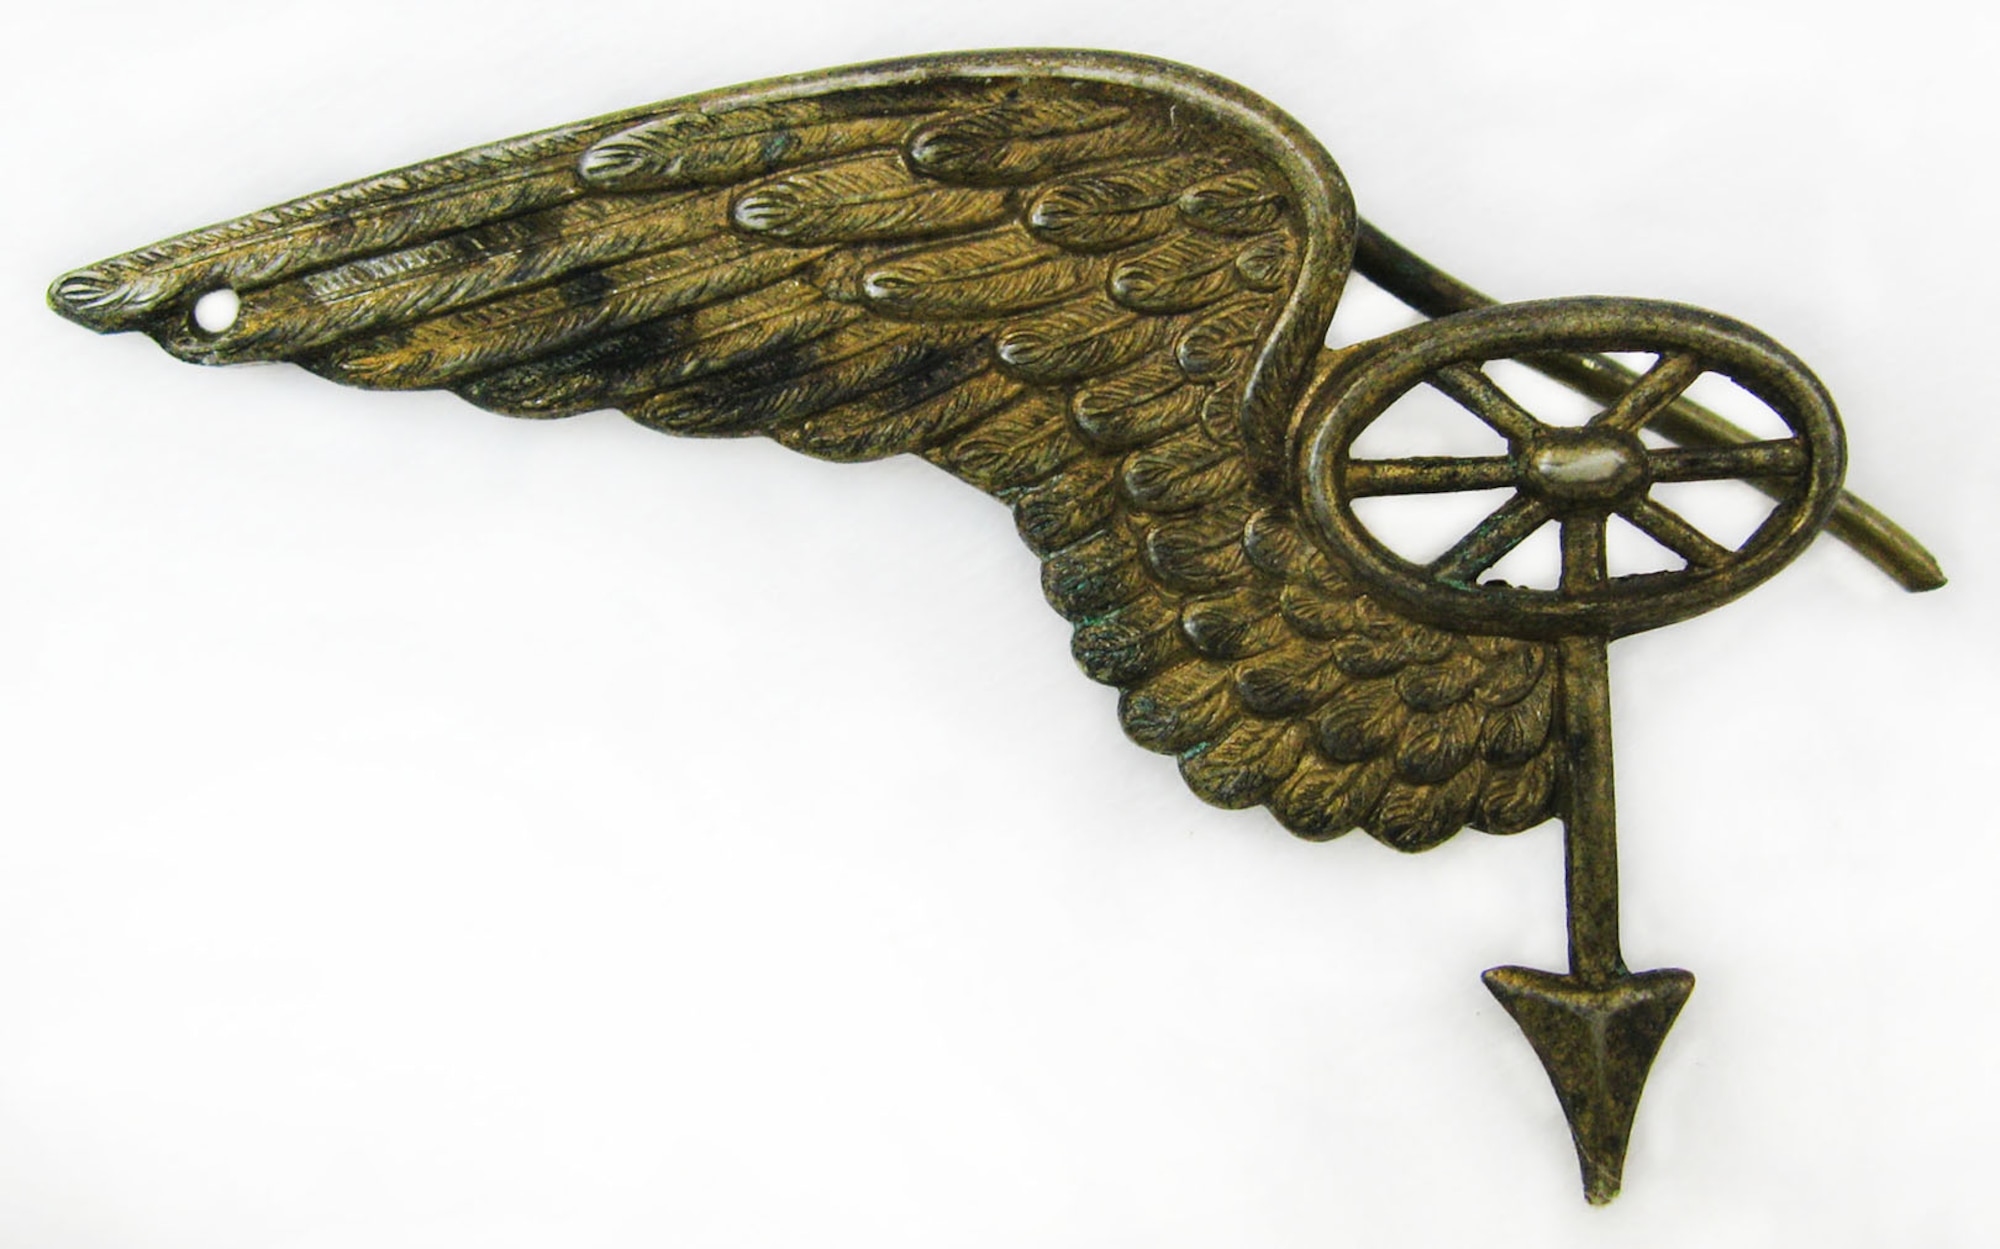 This insignia was worn by members of the Transportation Corp of the Austro-Hungarian Army.  The Austro-Hungarian Army was the combined military force of Austria and Hungary during World War I. (U.S. Air Force photo)